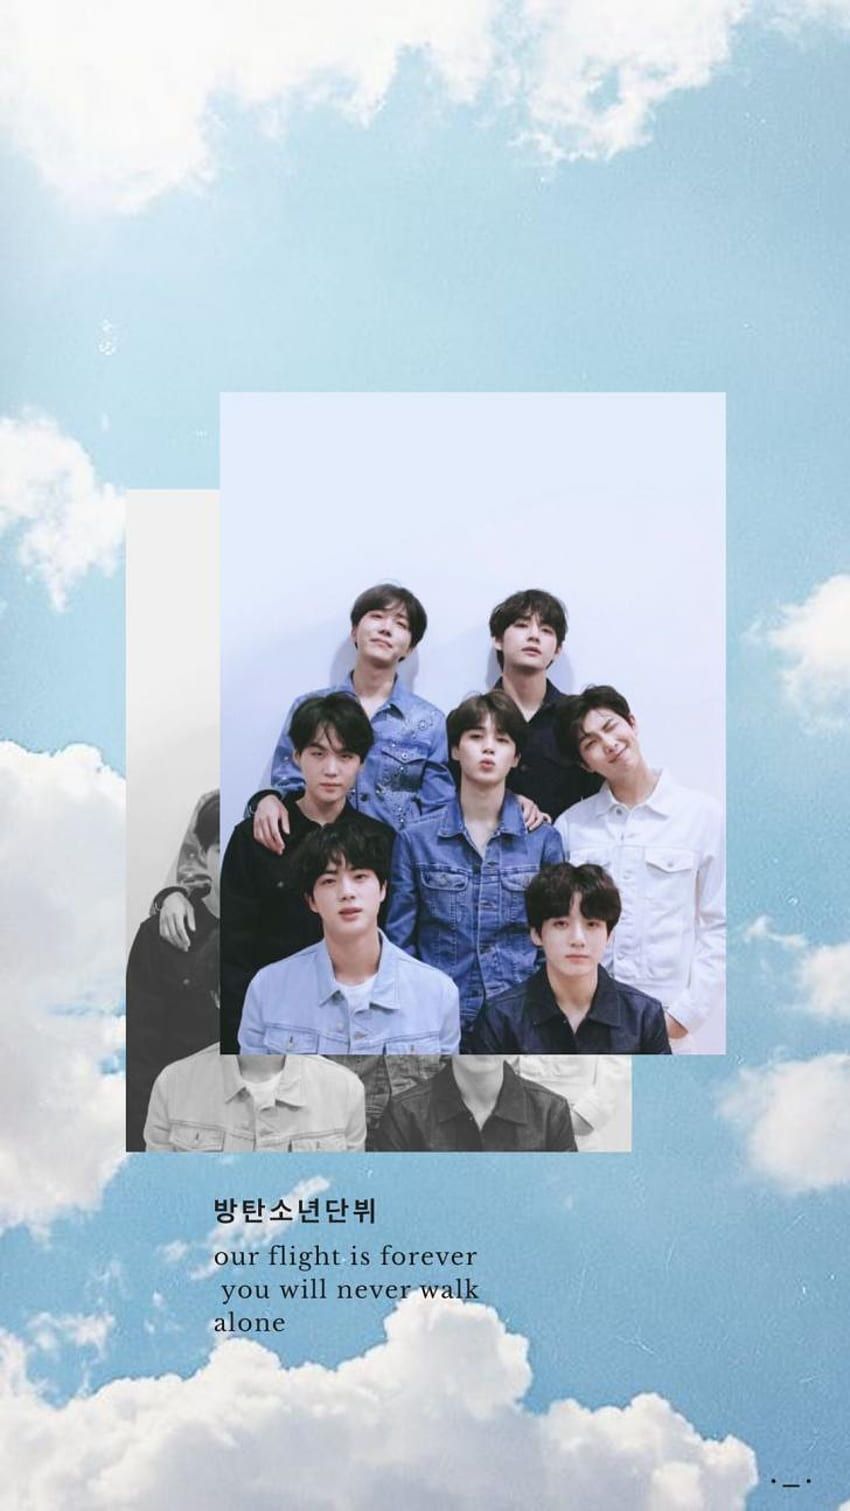 Bts wallpaper, our flight is forever, you will never walk alone - BTS